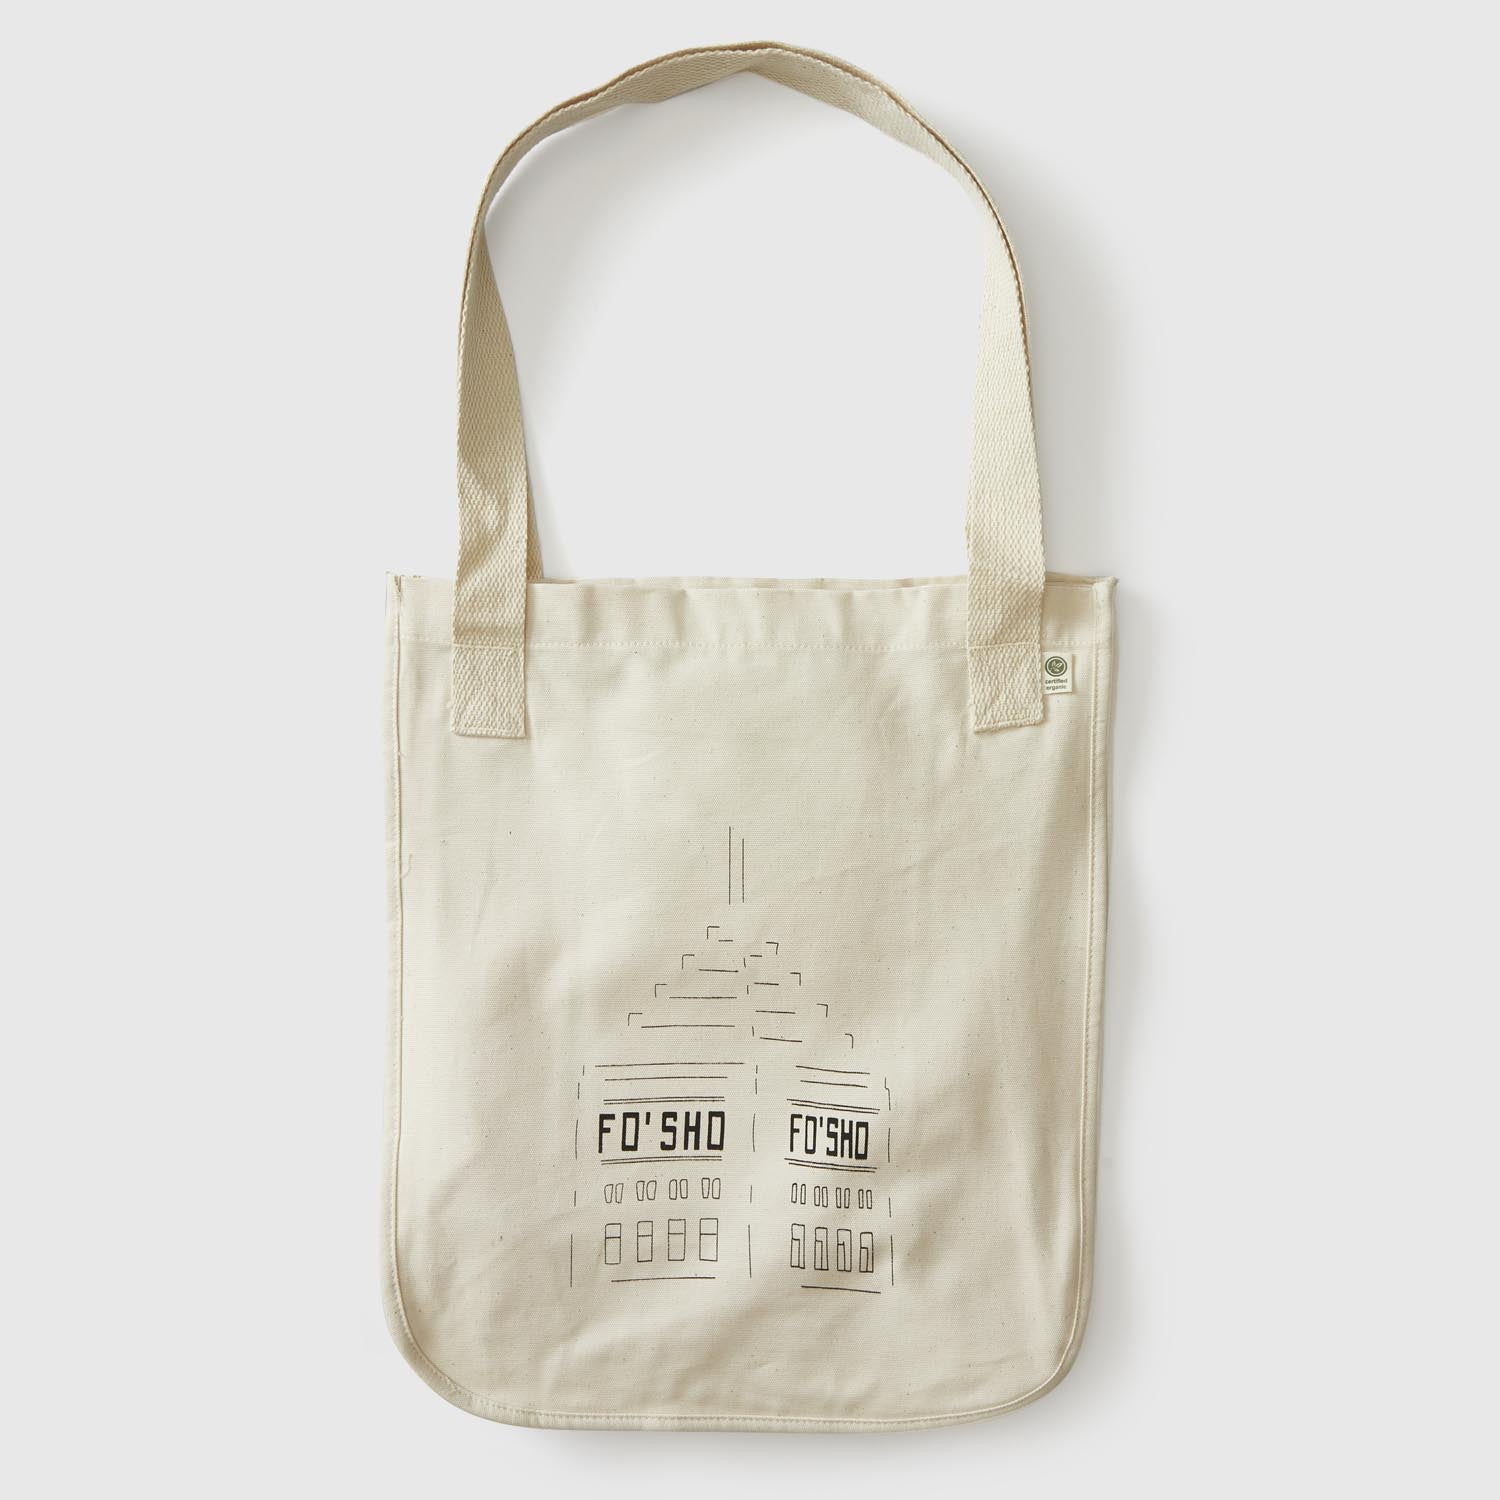 Natural market tote with illustration depicting the Foshay Tower with Fo' Sho in place of Foshay. minnesota clothing, minnesota apparel, minnesota accessories, minnesota gifts, minnesota goods, minnesota themed clothing, minnesota themed apparel, minnesota themed gifts, minnesota themed goods, minnesota totes, minnesota tote bags, minnesota tote, minnesota themed tote bags, minnesota themed totes, minnesota themed tote